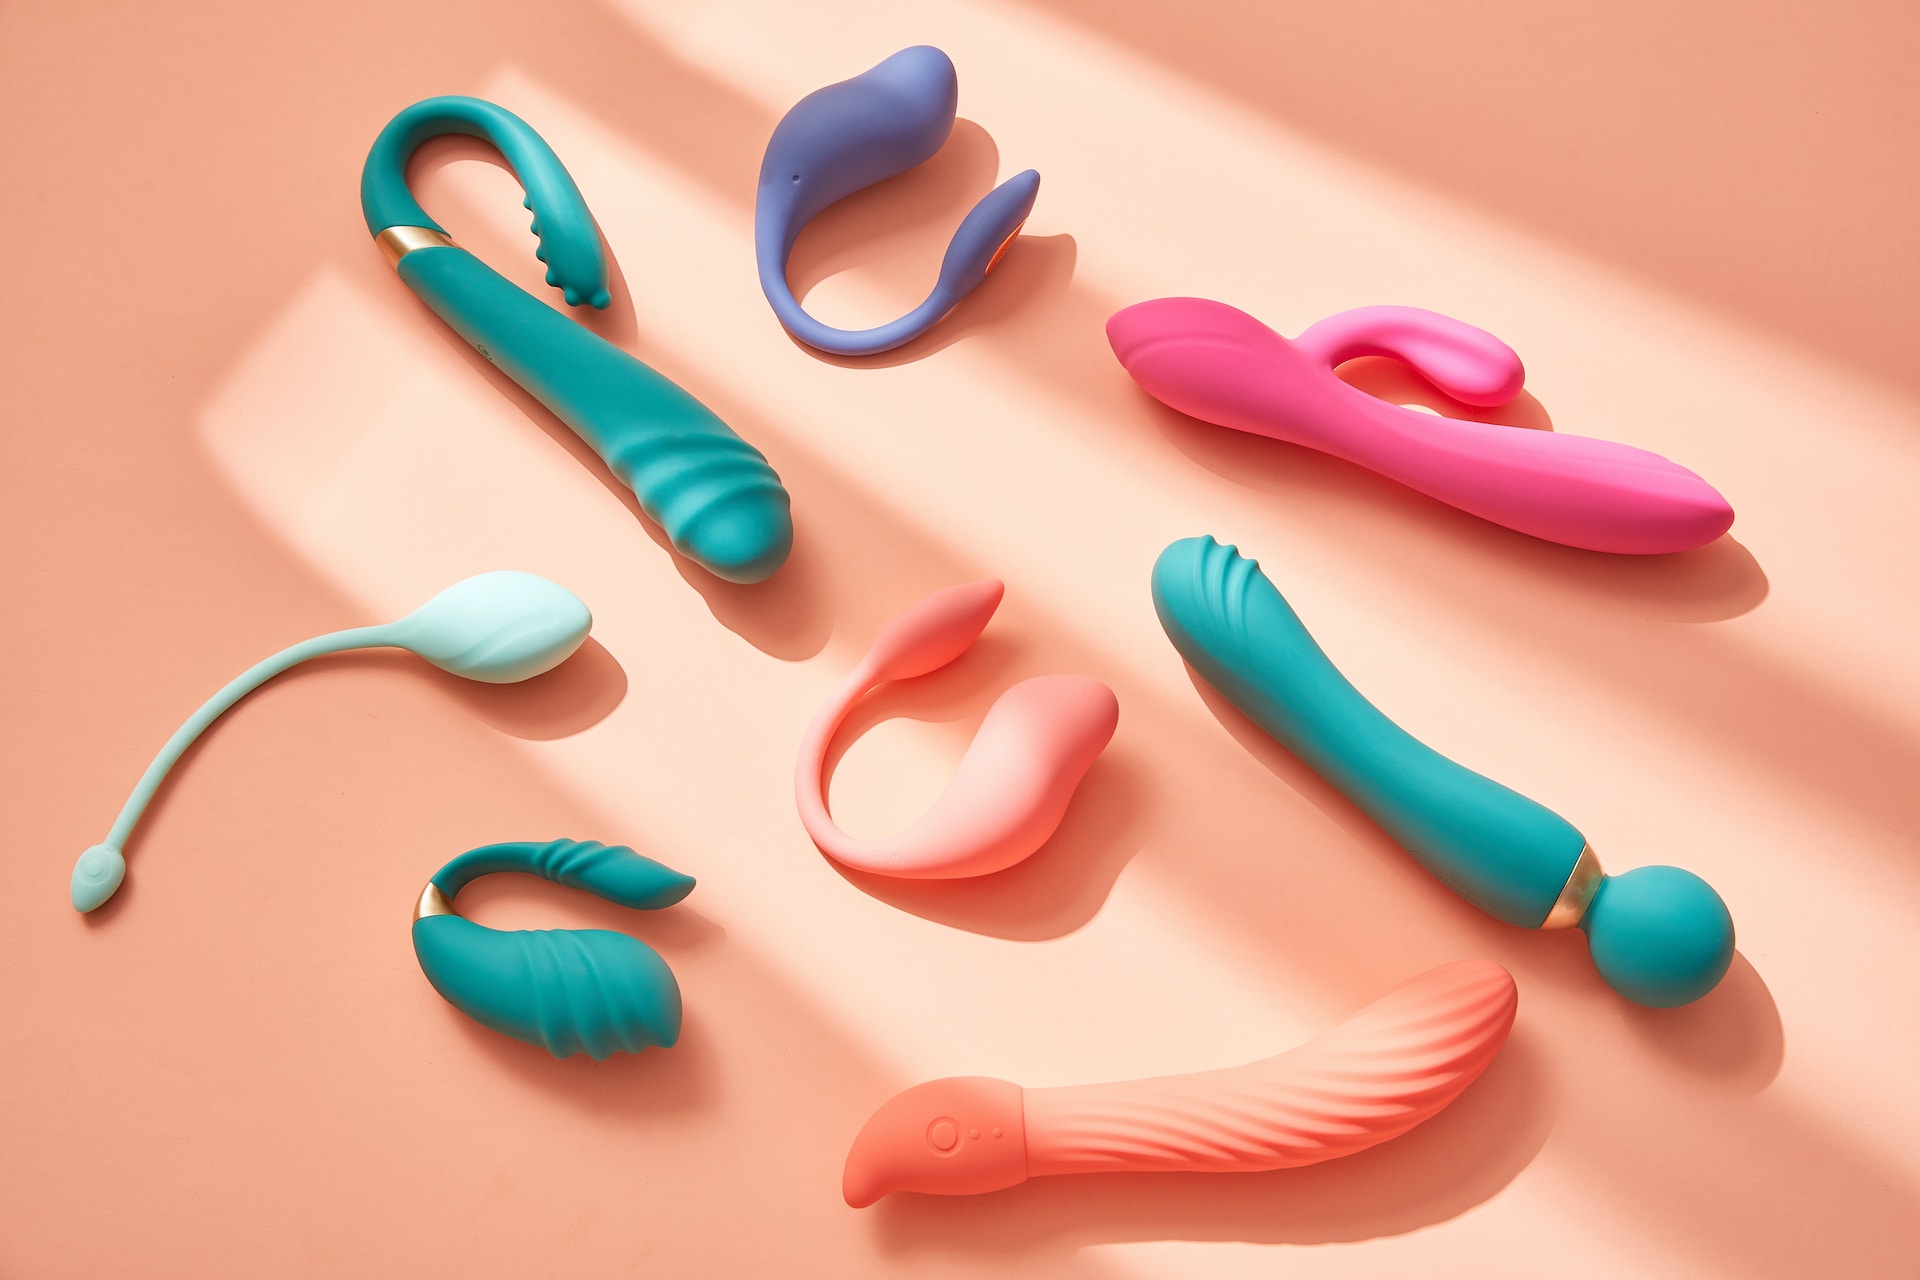 Different types of sex toys to kink up your sex life